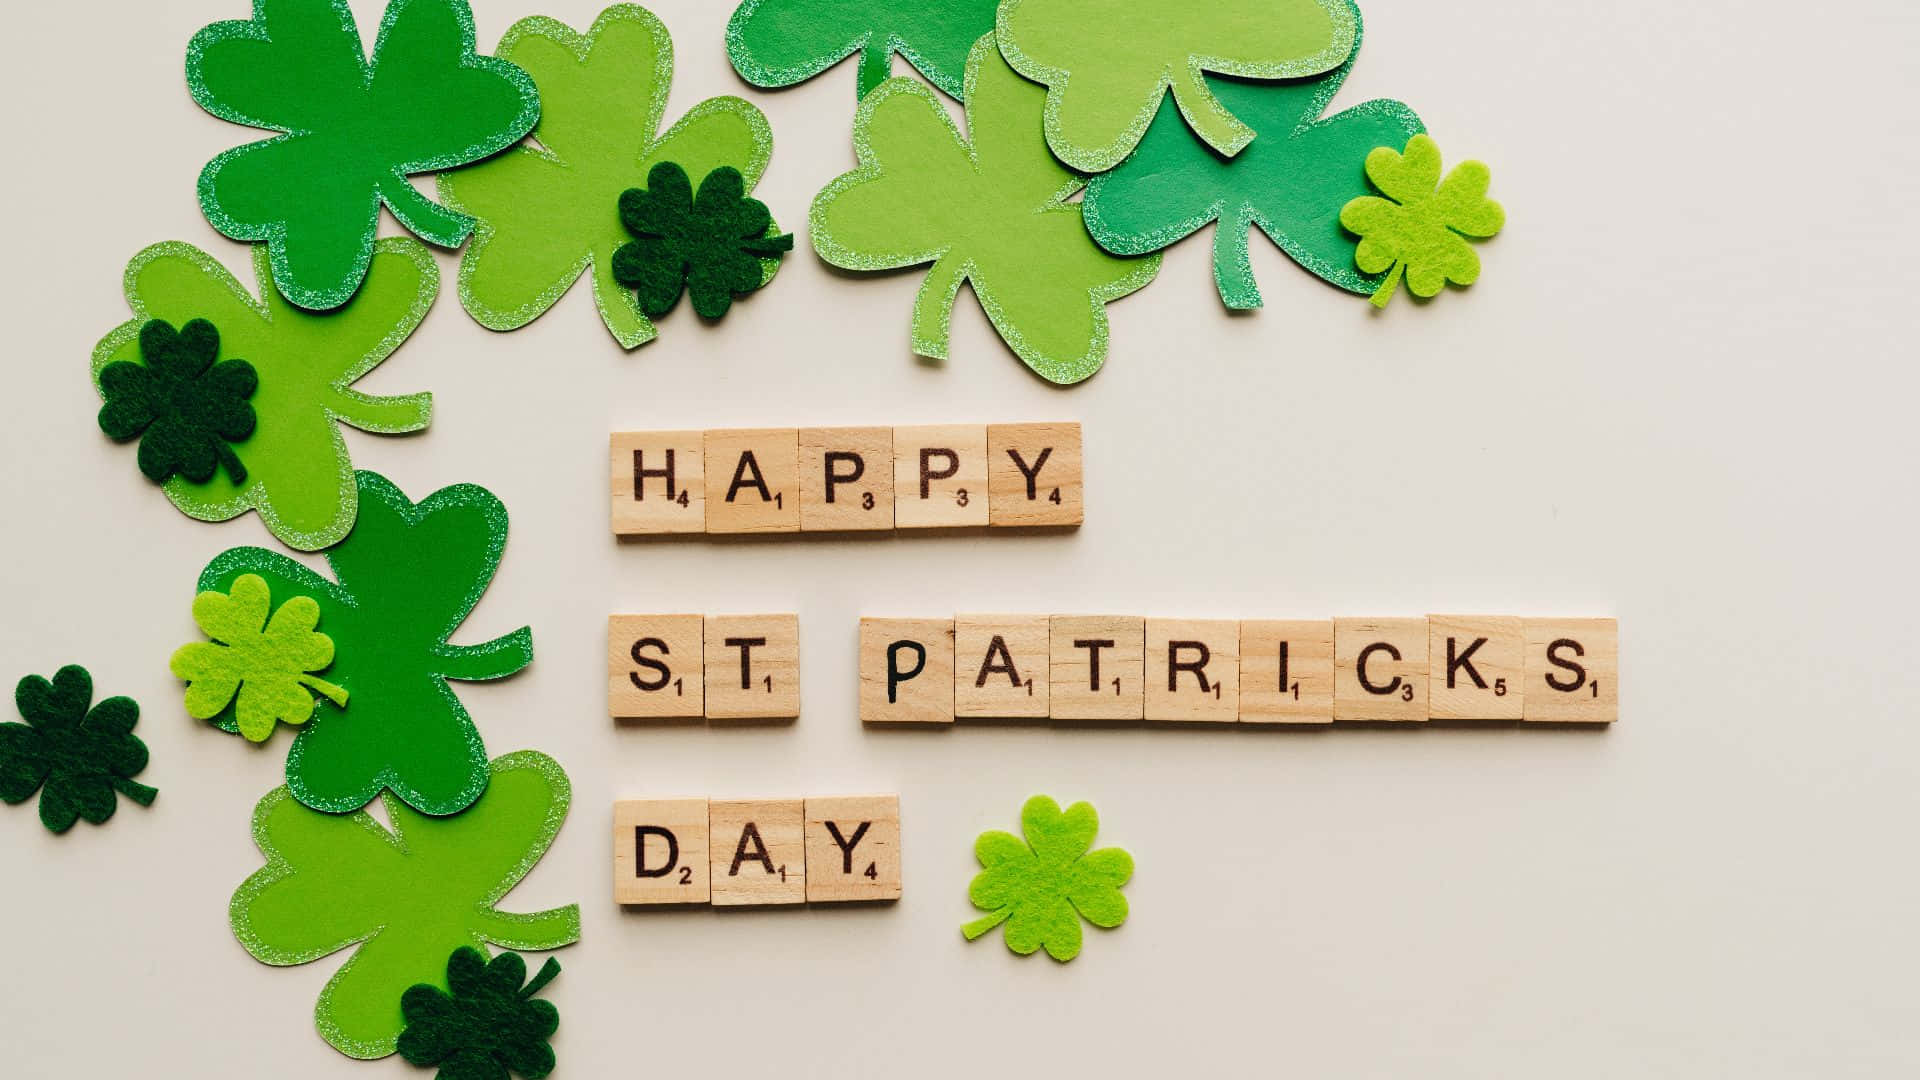 Happy St Patrick's Day With Shamrocks And Leaves